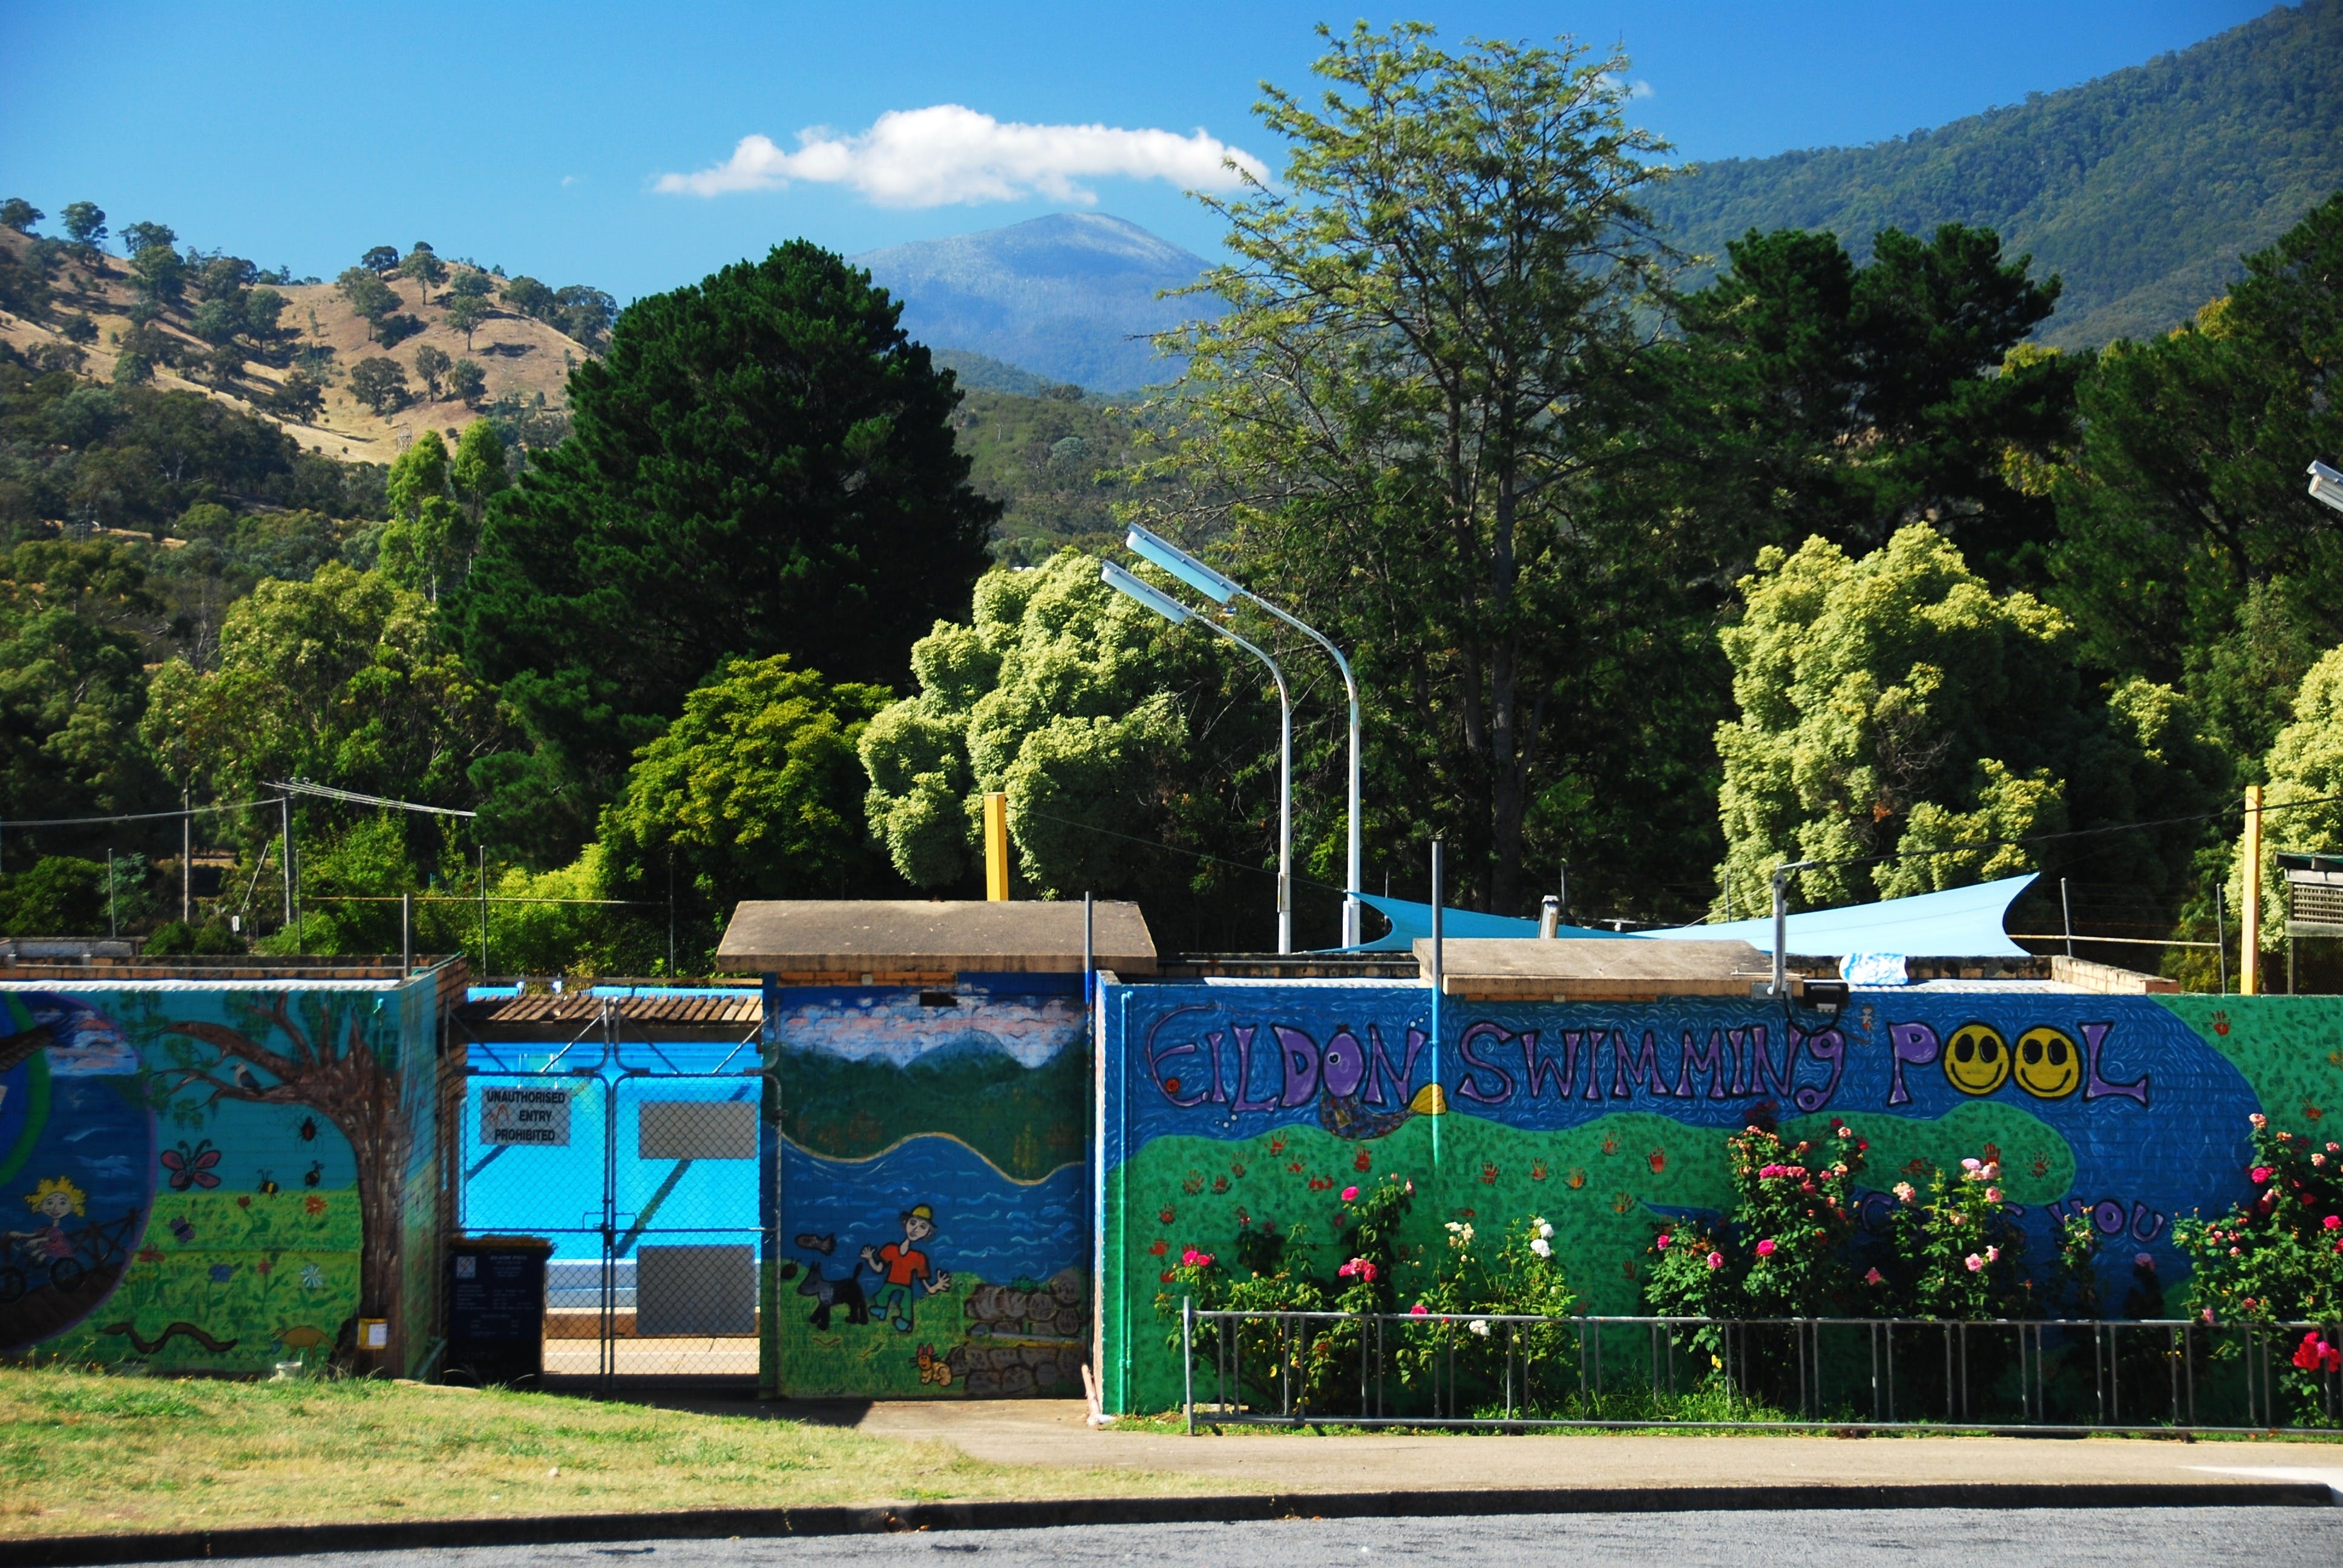 Eildon Outdoor Swimming Pool - Tourism Cairns